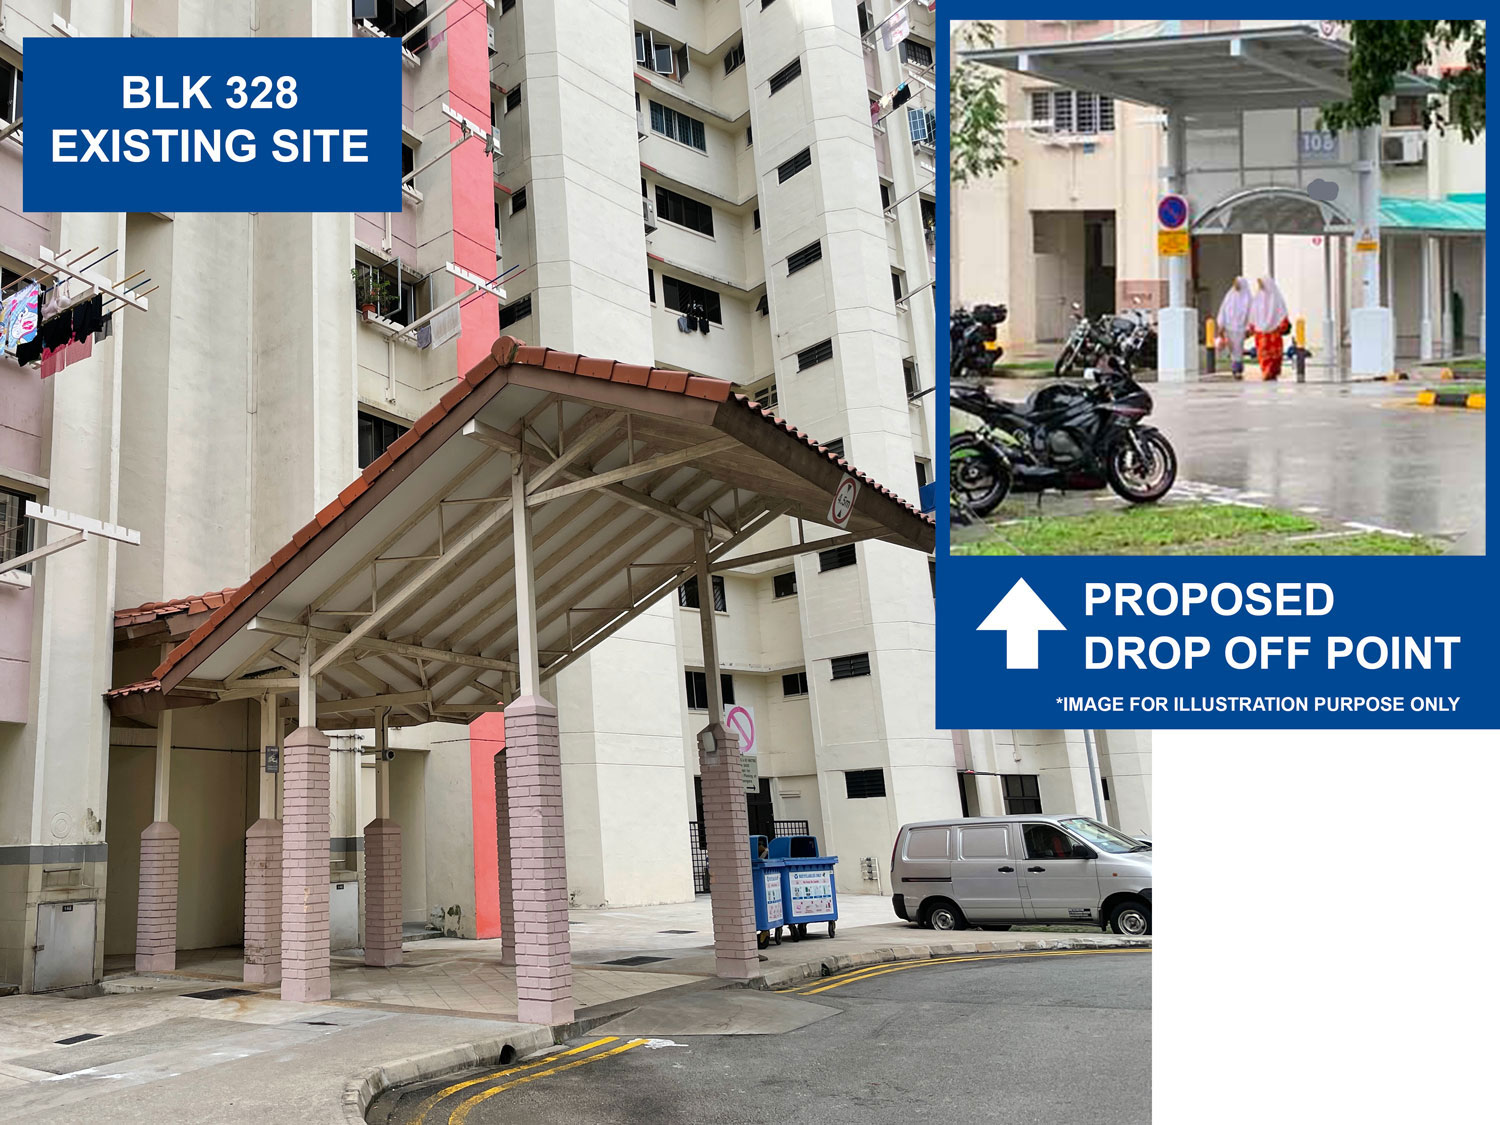 Upgrading of Drop Off Point at Blk 328